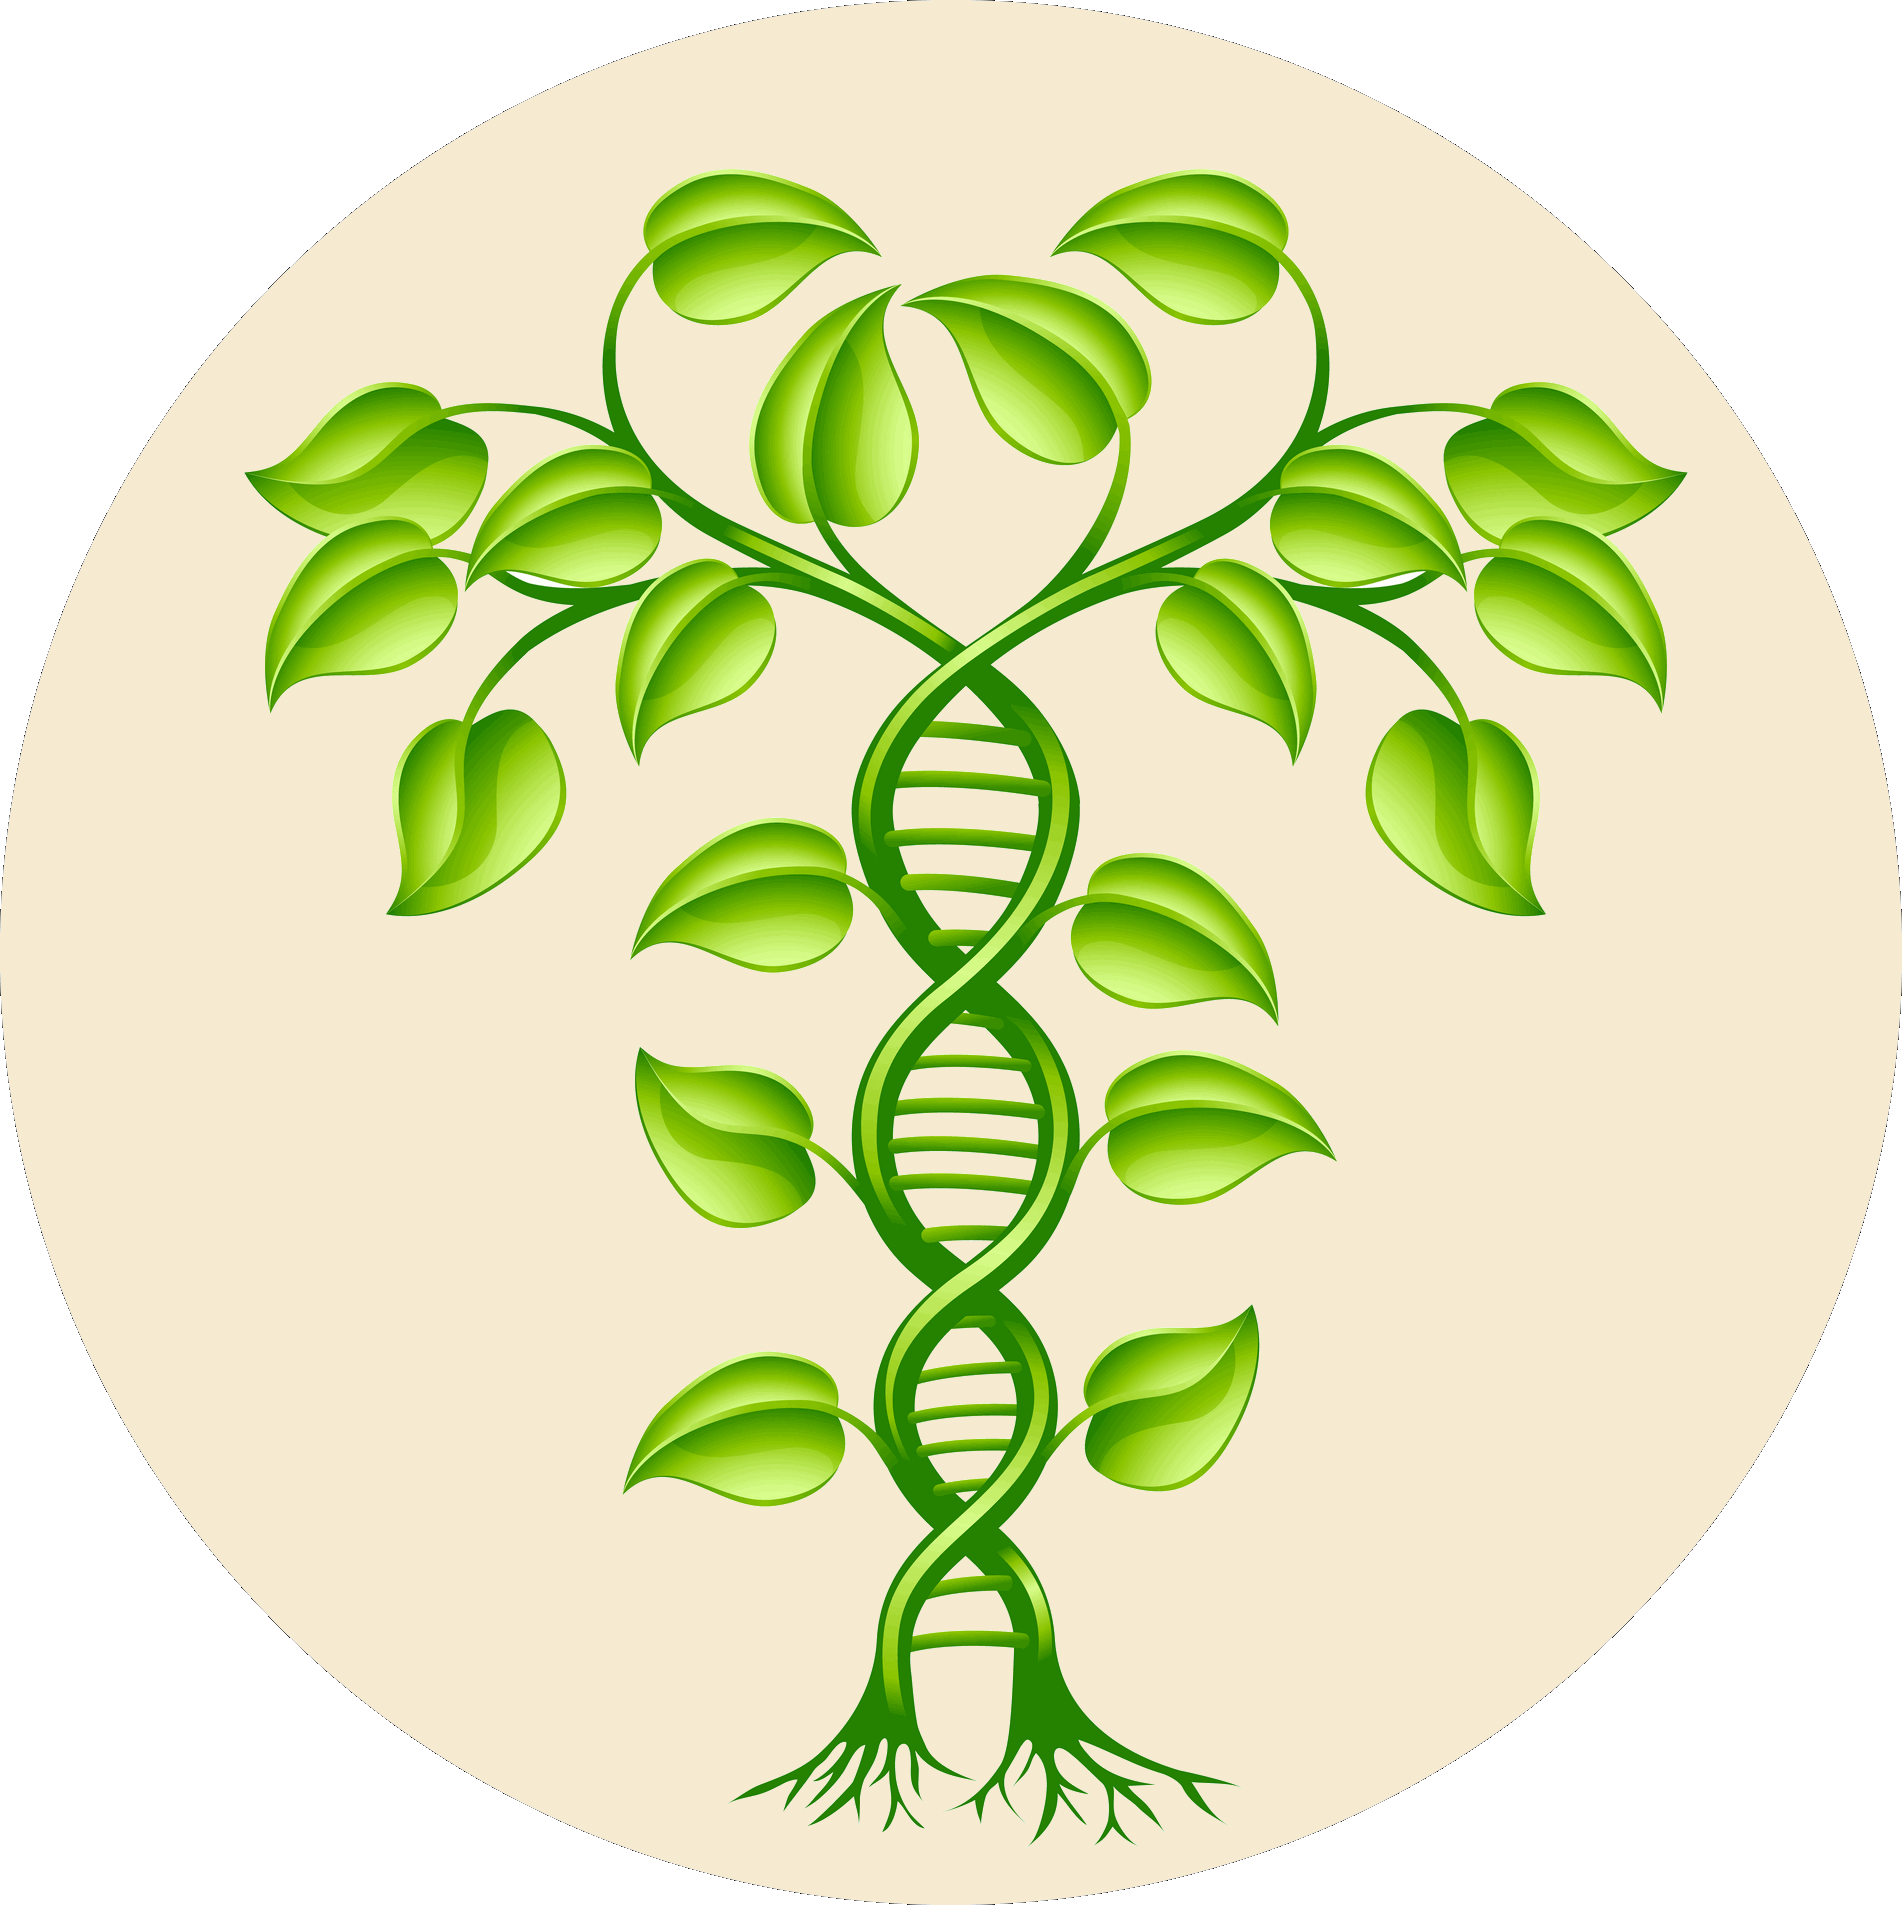 Gradient Green Plant Forming A DNA Caduceus by Christian Georghiou. Copyright by and licensed from.